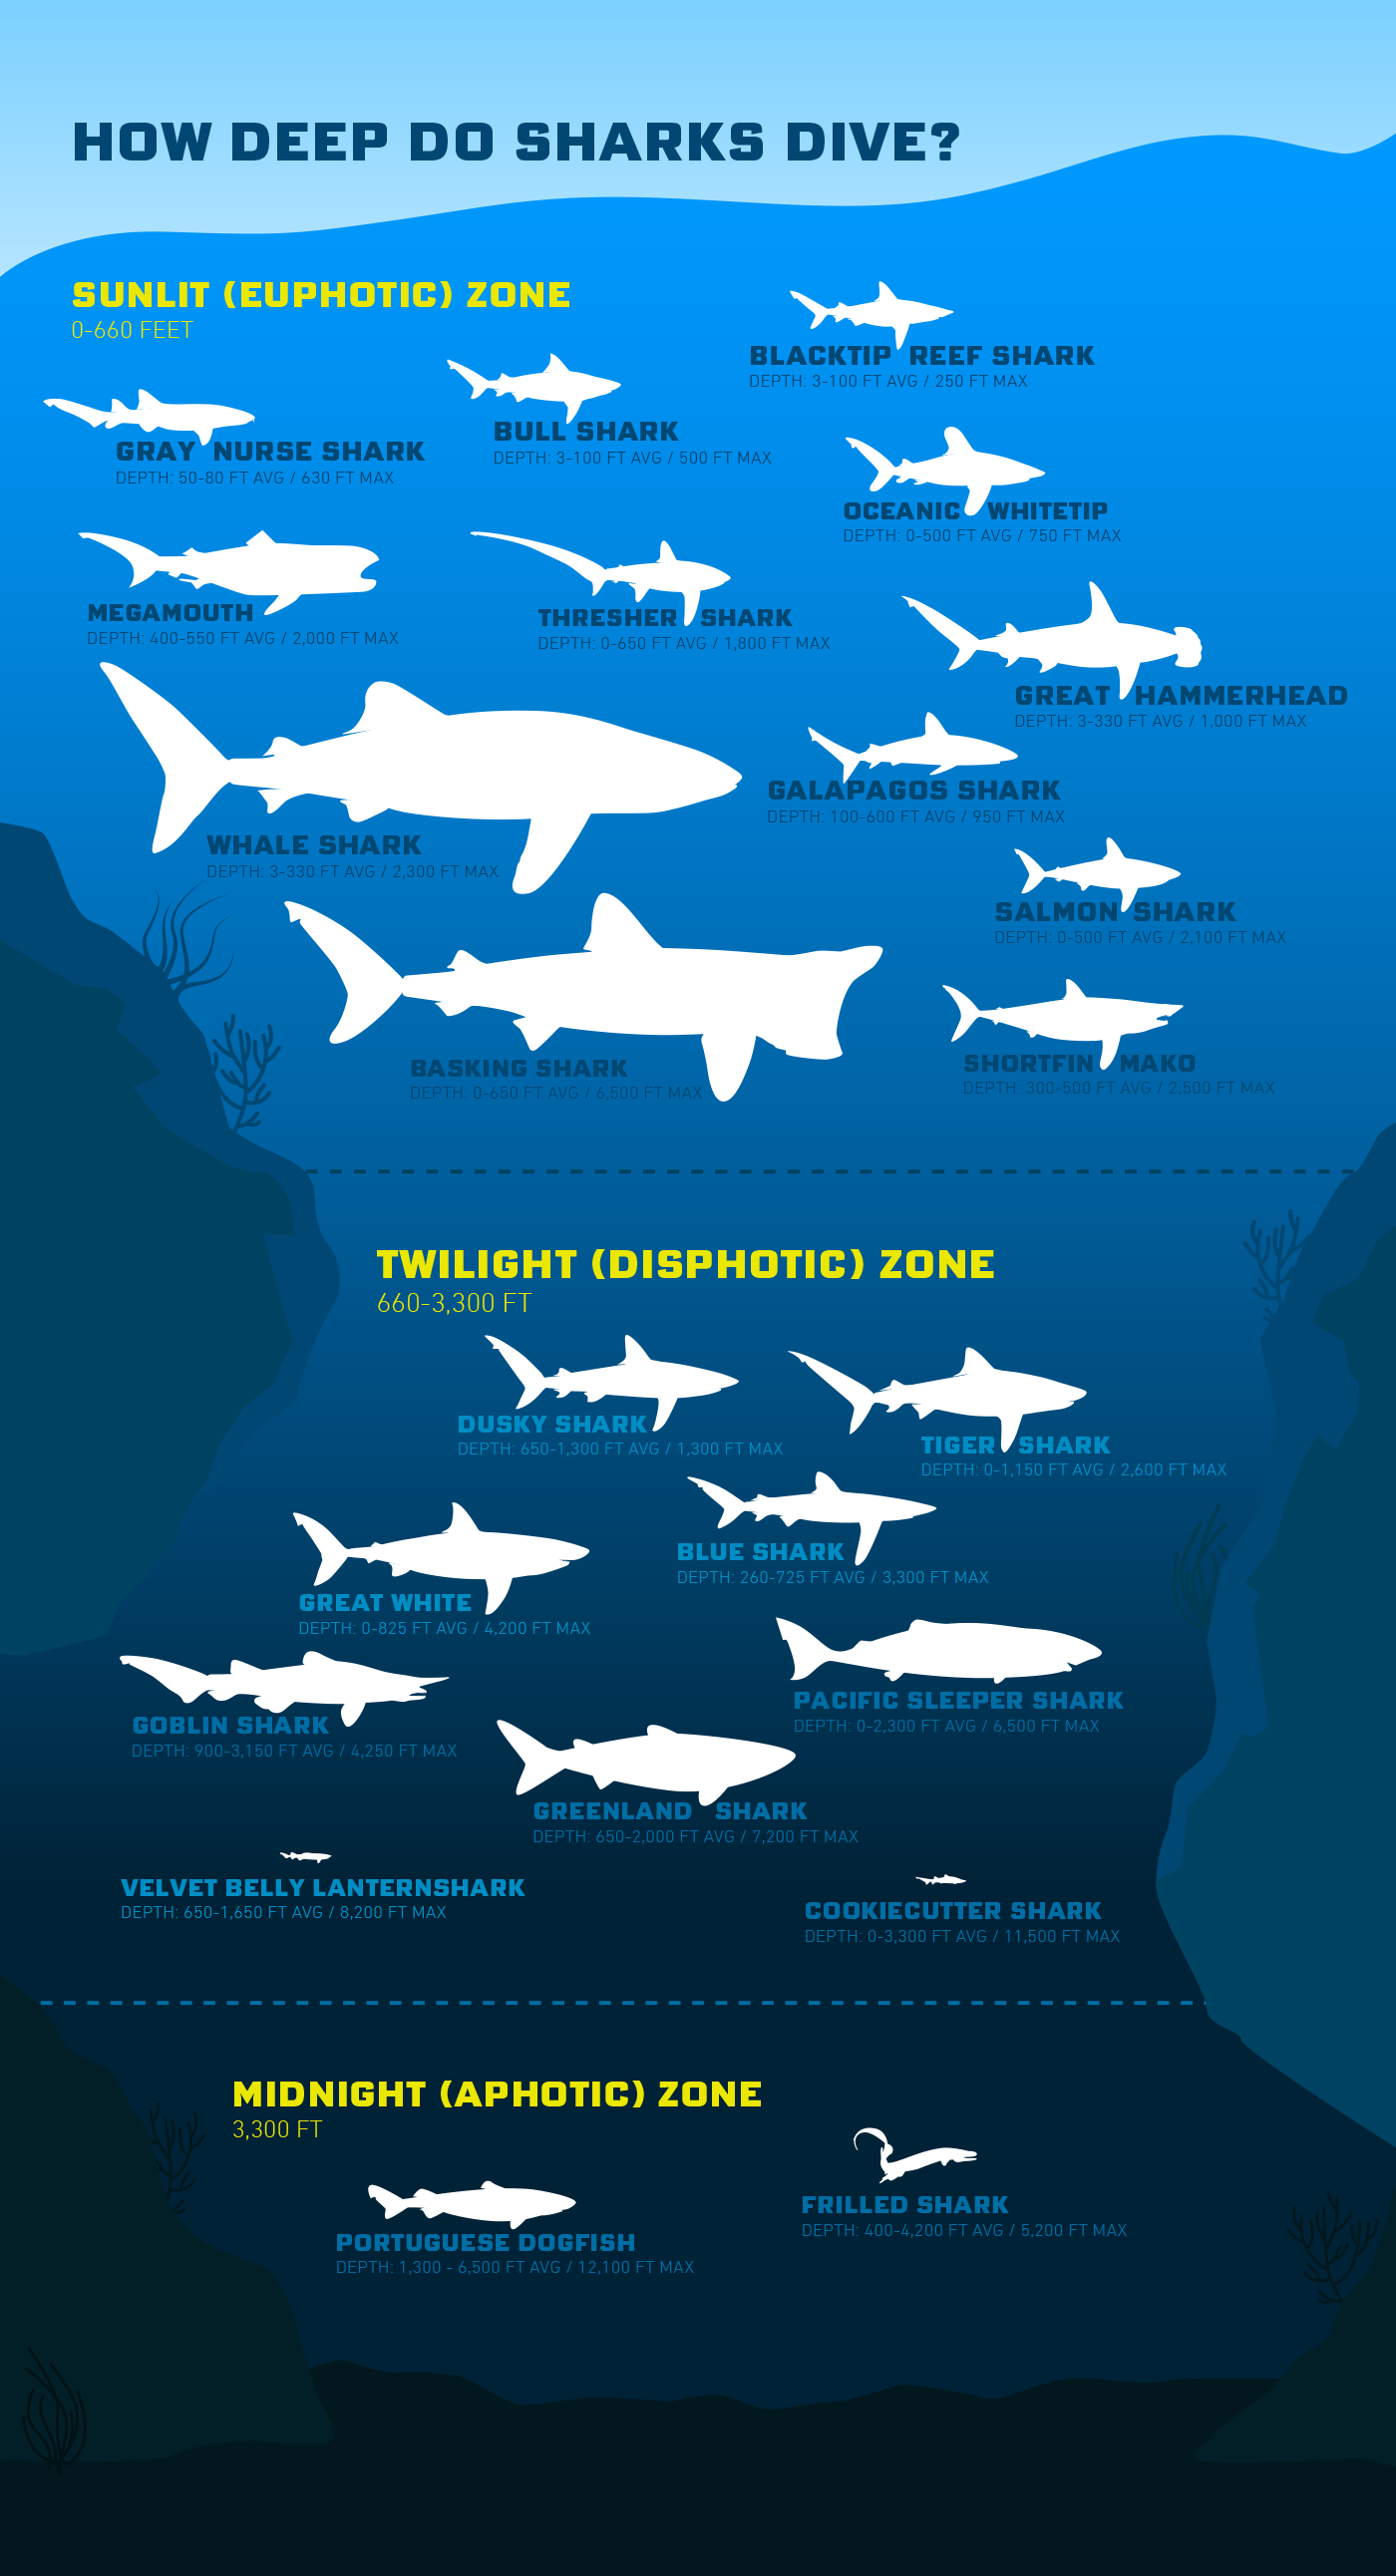 Celebrate Shark Week with this fun infographic on how deep sharks dive